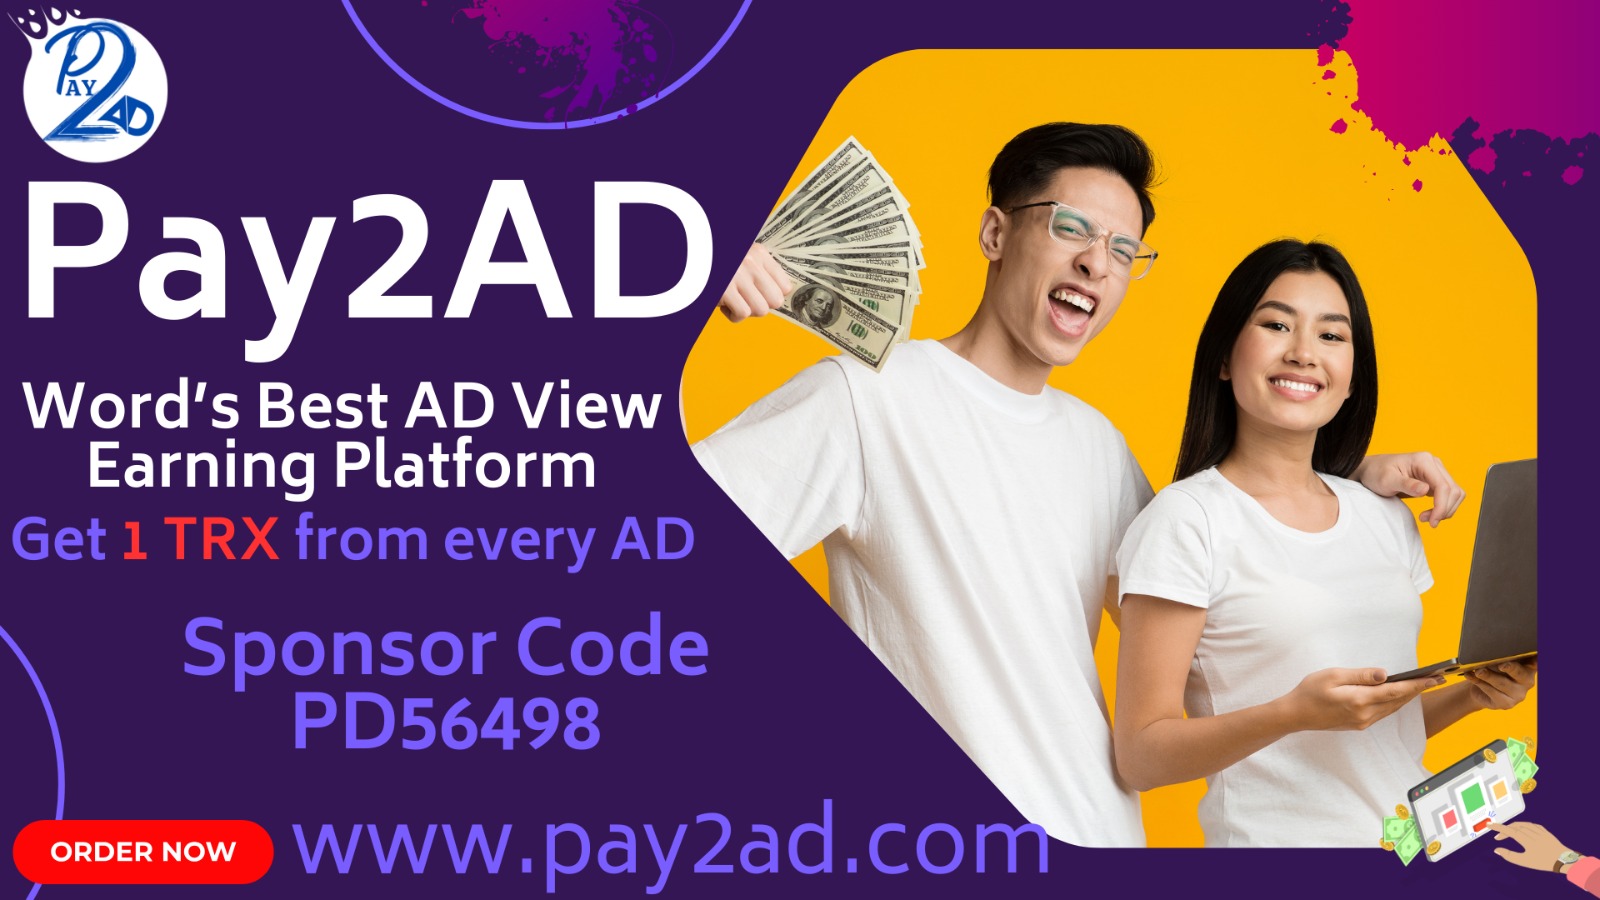 Pay2AD